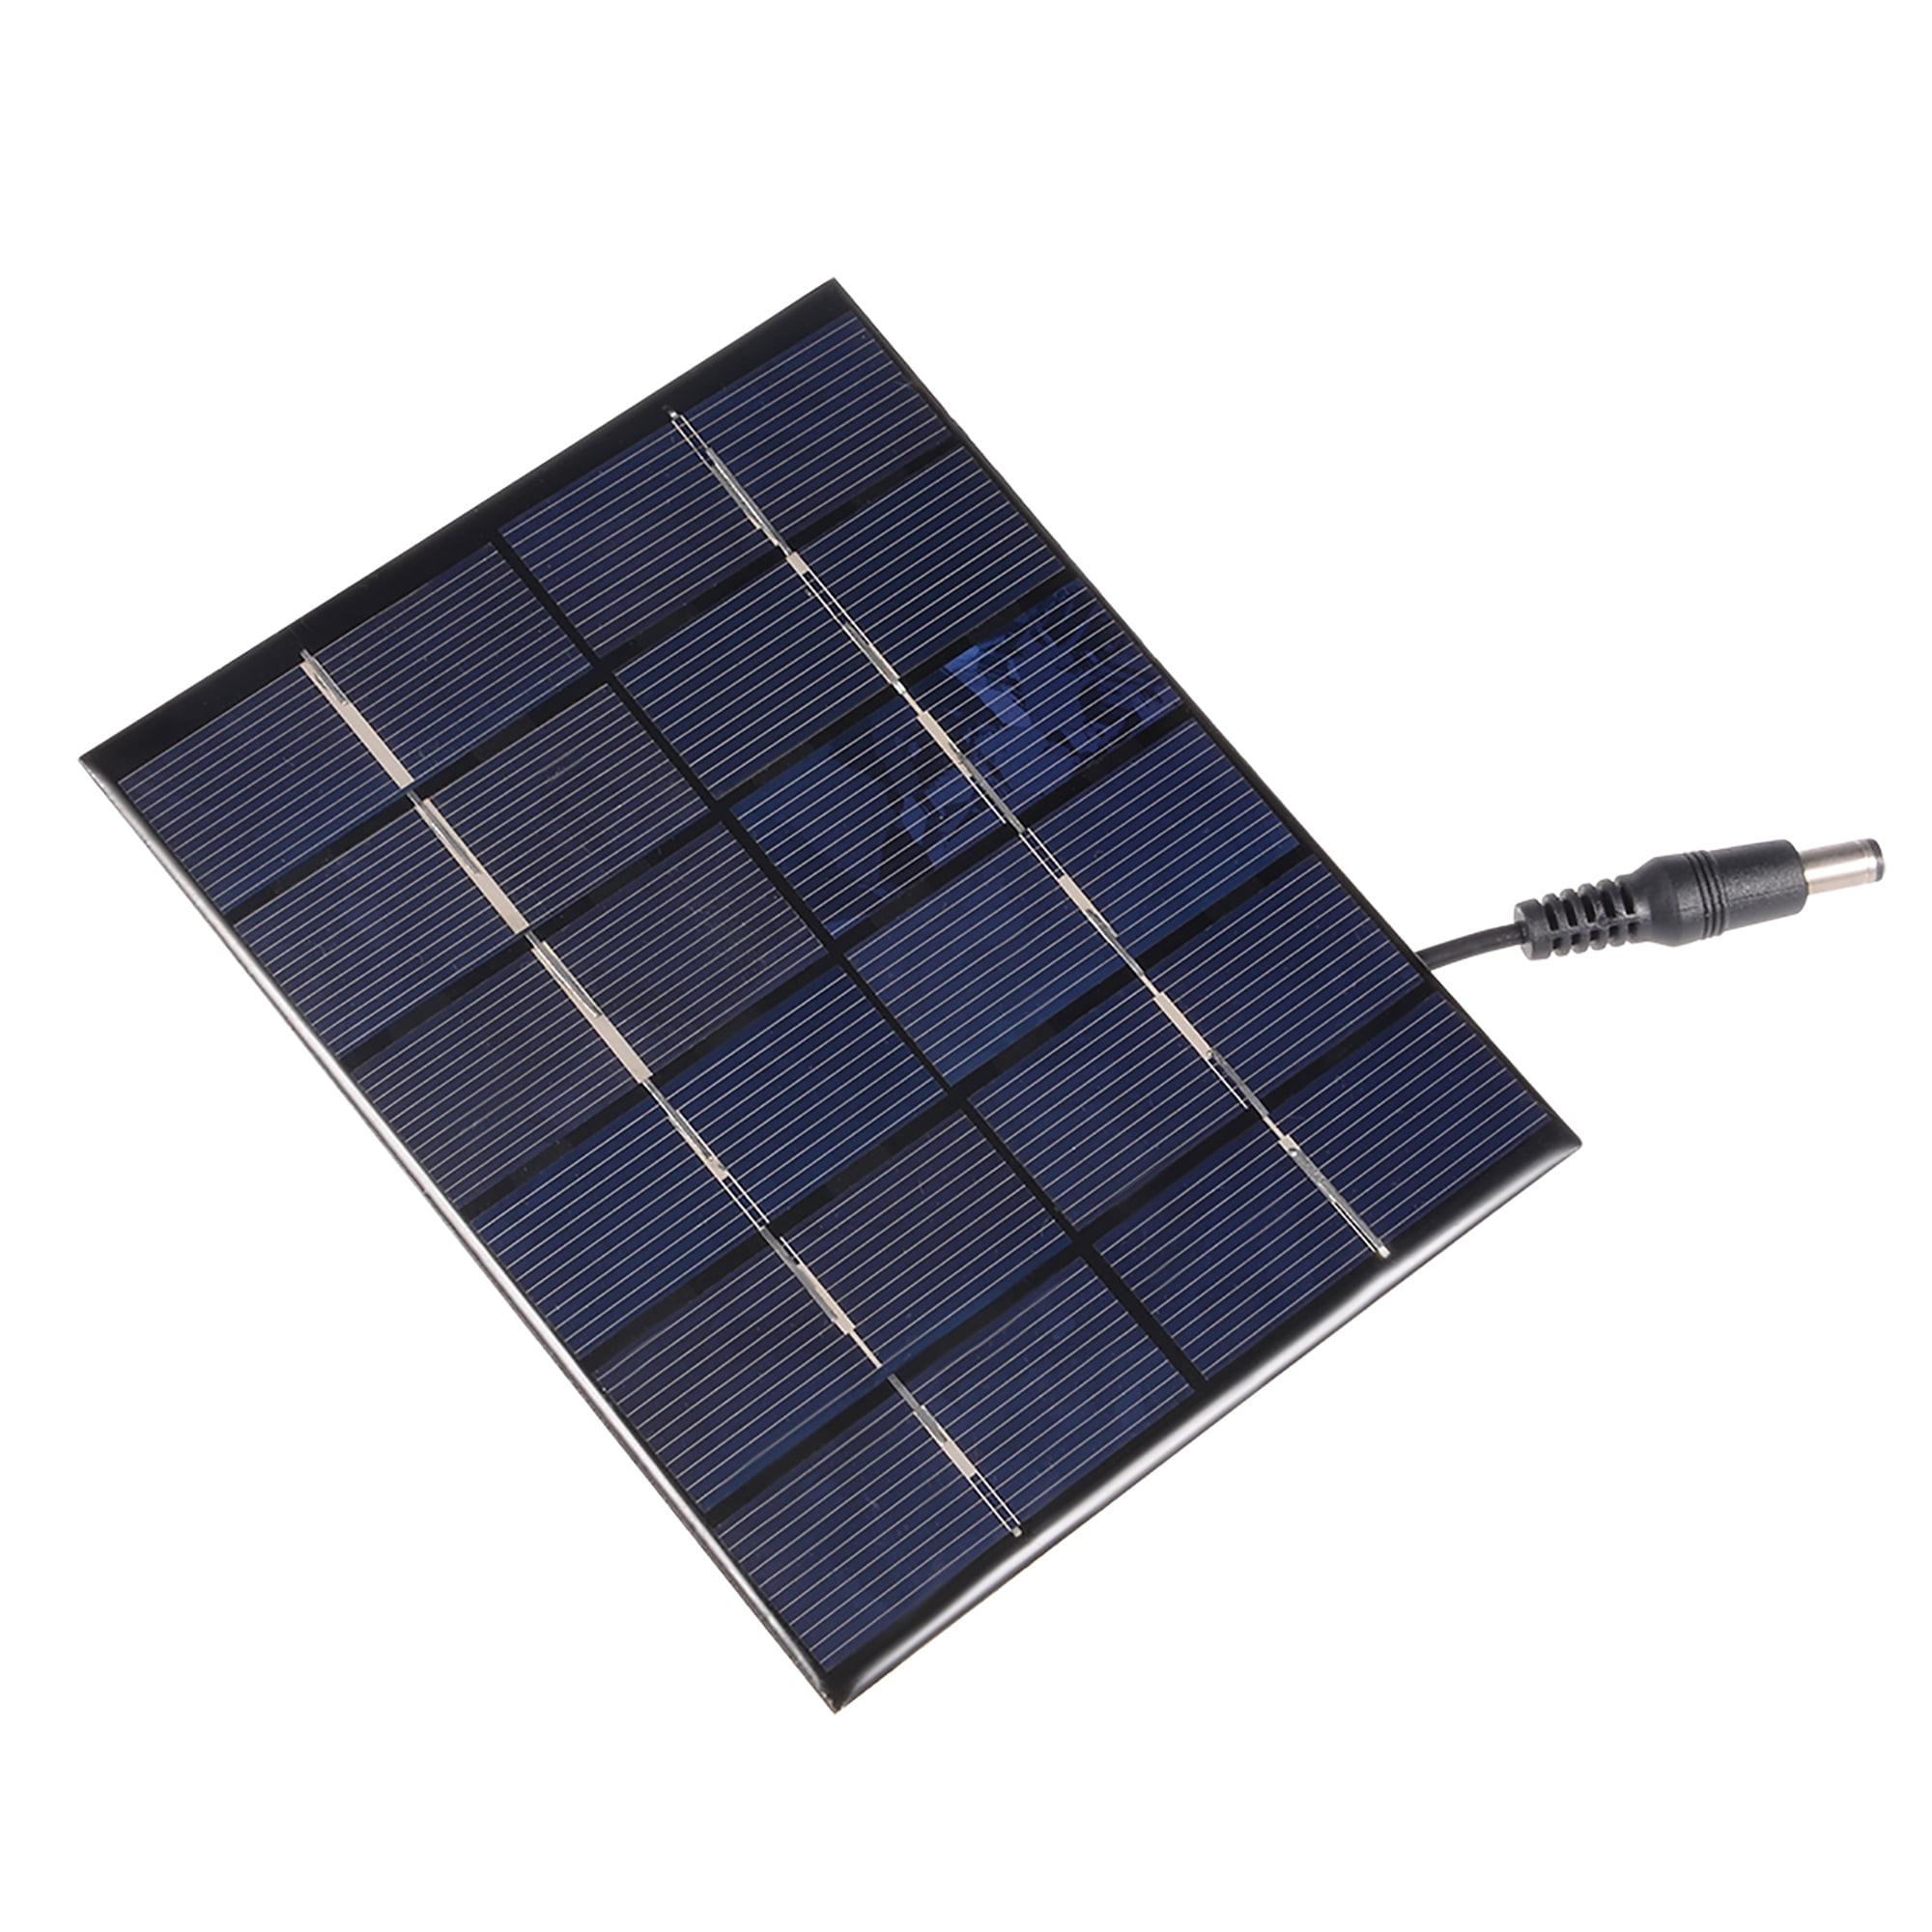 Solar Panel Module Solar Charger Panel Durable 2W 6V Mini Monocrystalline Silicon Camping Use for Solar Lights Solar Toys Outdoor Use